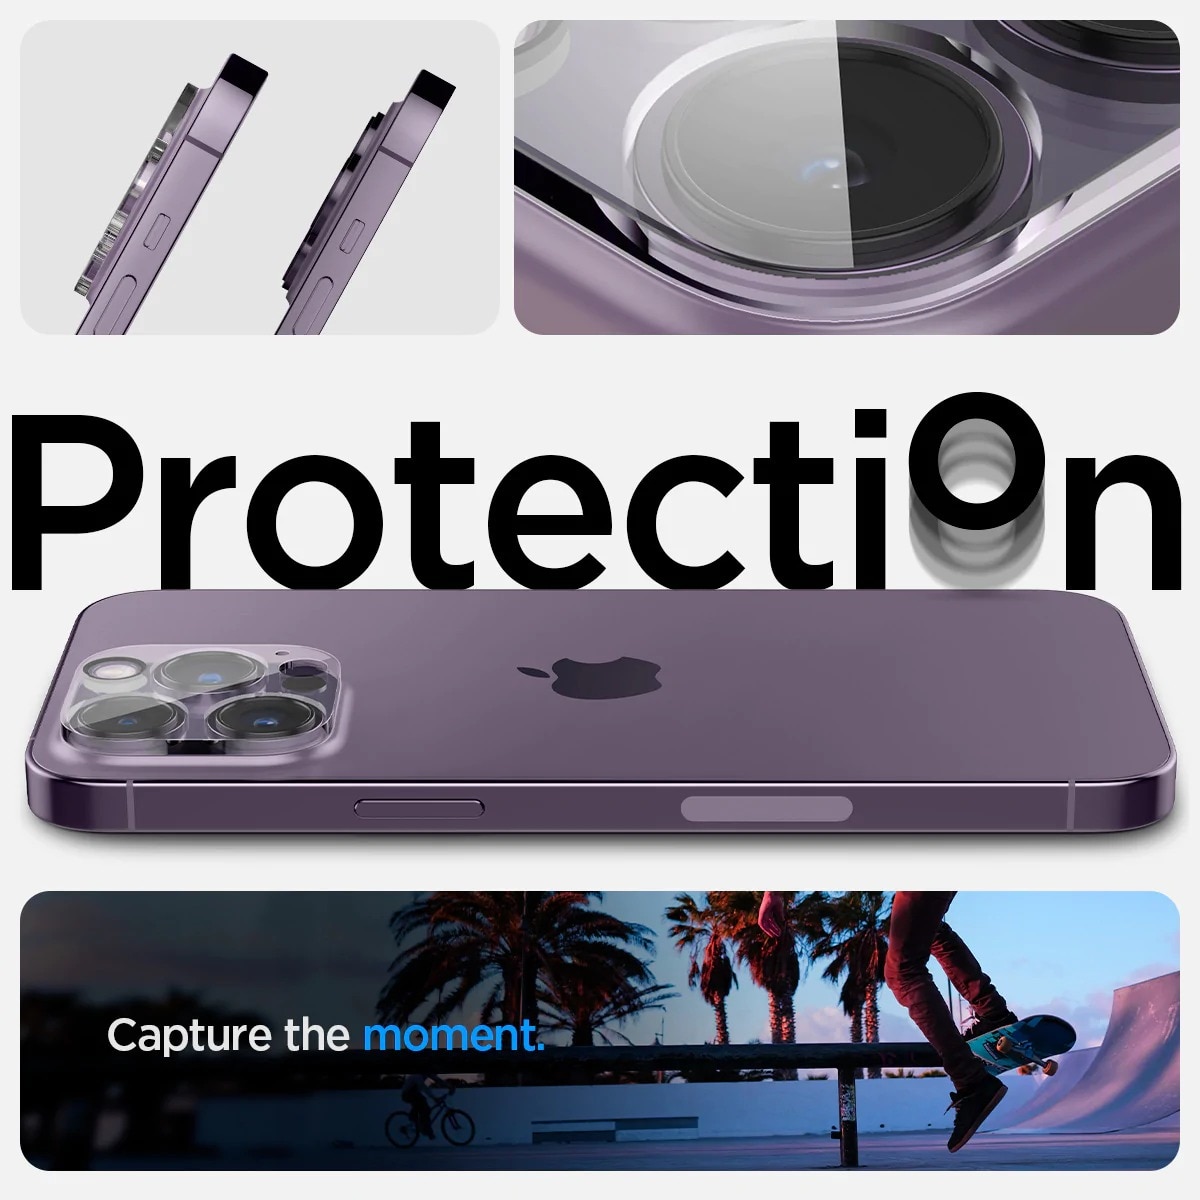 Optik Lens Protector (2-pack) iPhone 14 Pro Crystal Clear